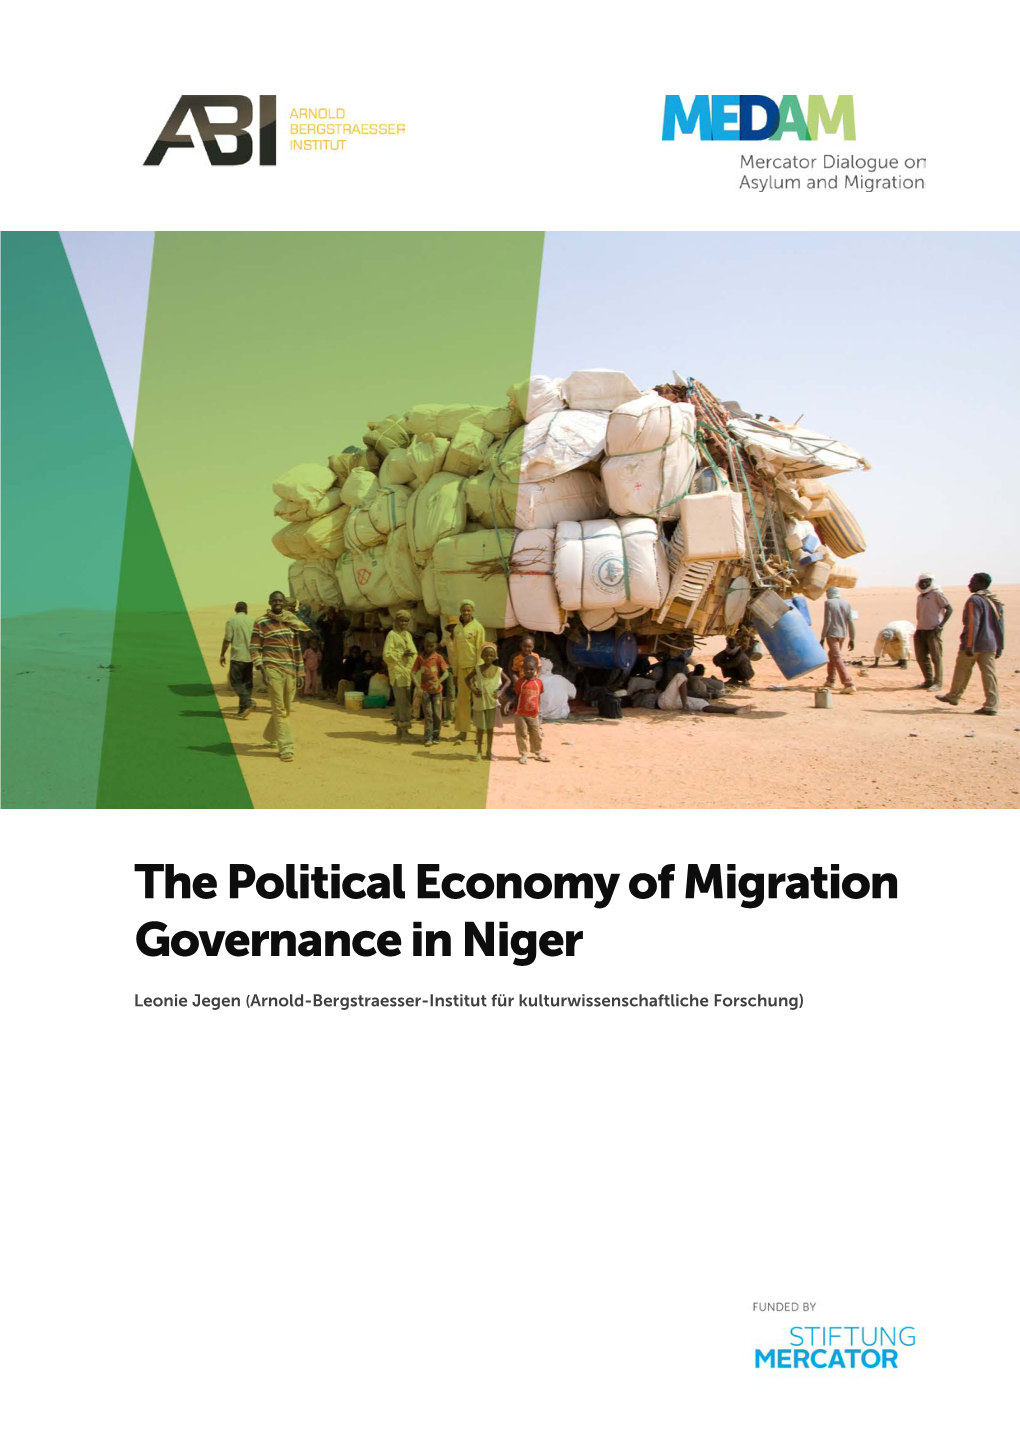 The Political Economy of Migration Governance in Niger